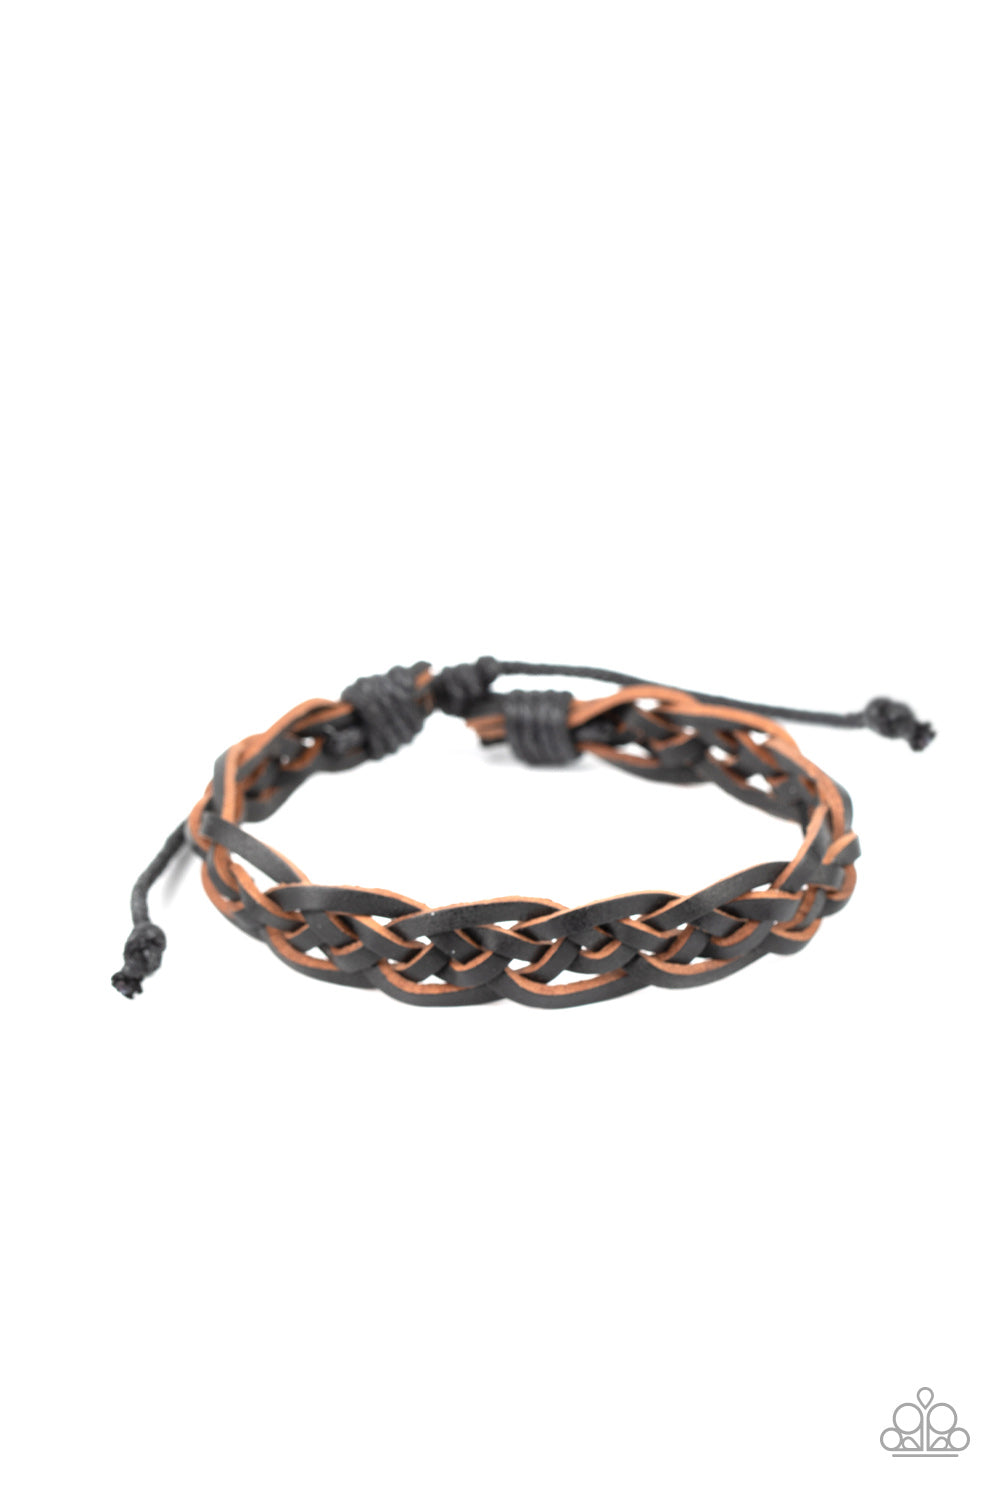 Rustic leather laces decoratively weave across the wrist, creating a rugged centerpiece. Features an adjustable sliding knot closure.